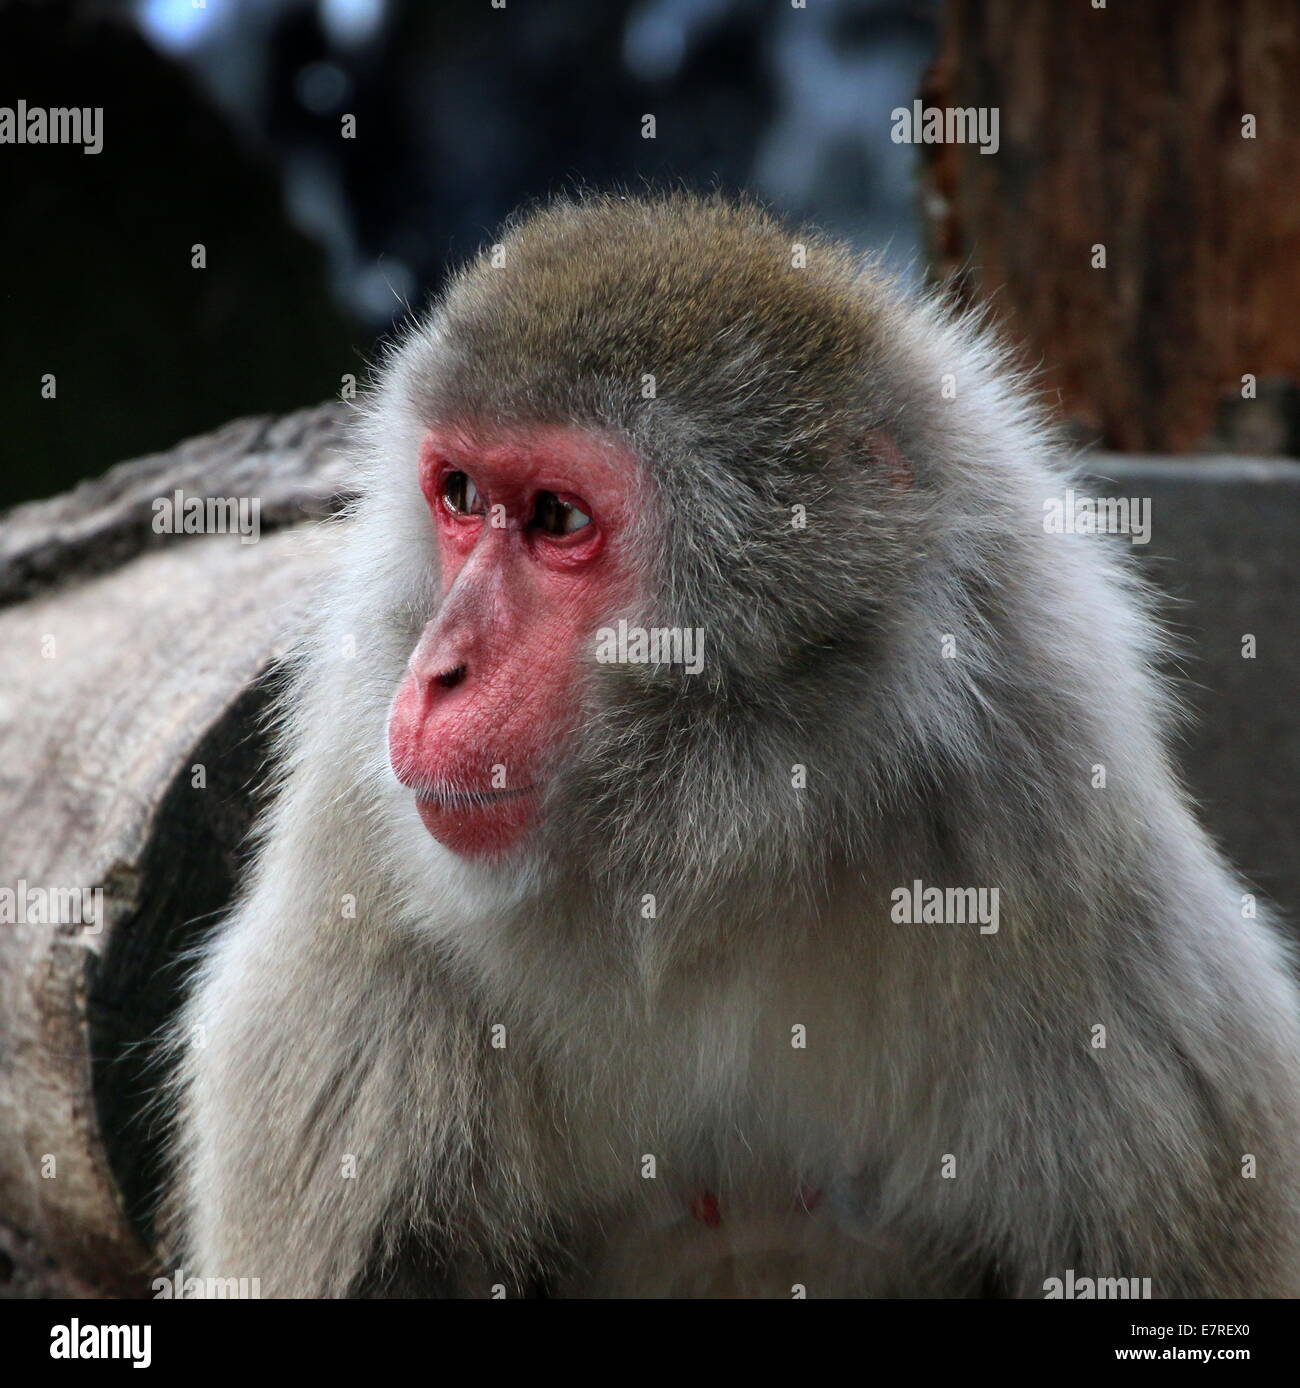 Japanese macaque or Snow monkey (Macaca fuscata) close-up of the head Taken in Artis Zoo, Amsterdam Stock Photo